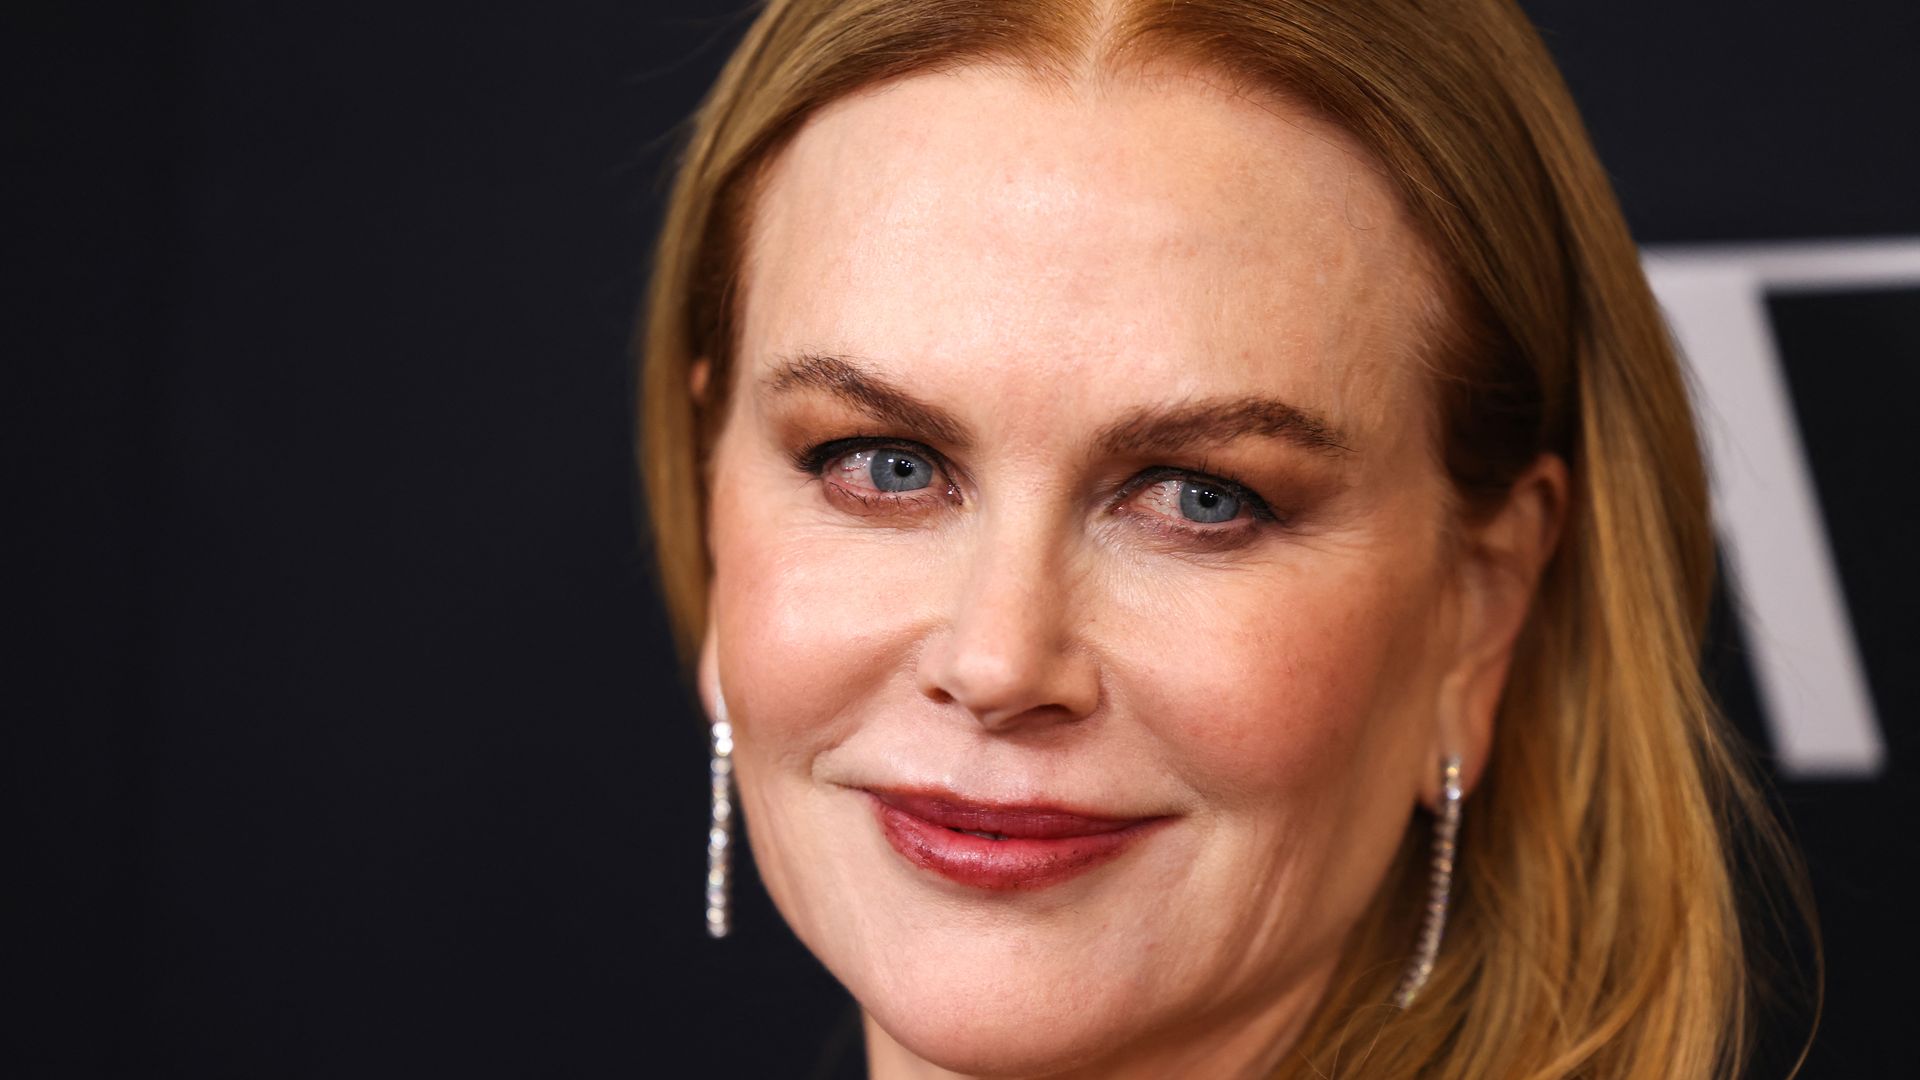 Meet Nicole Kidman's 4 children: All about her kids with Keith Urban and Tom Cruise